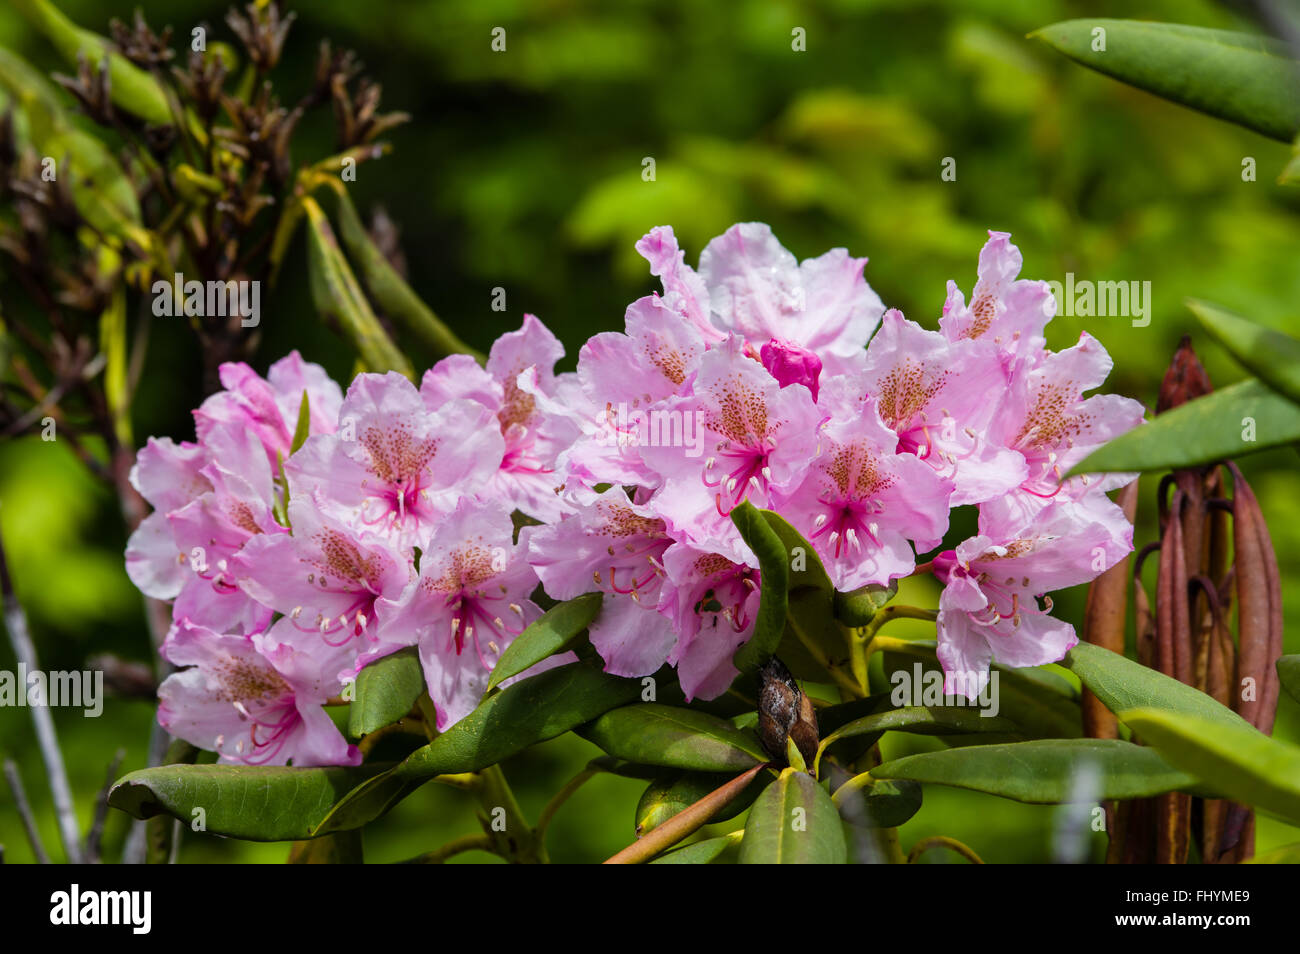 Native rhododendron plants blooming with pink flowers in the Mt Hood National Forest. Stock Photo